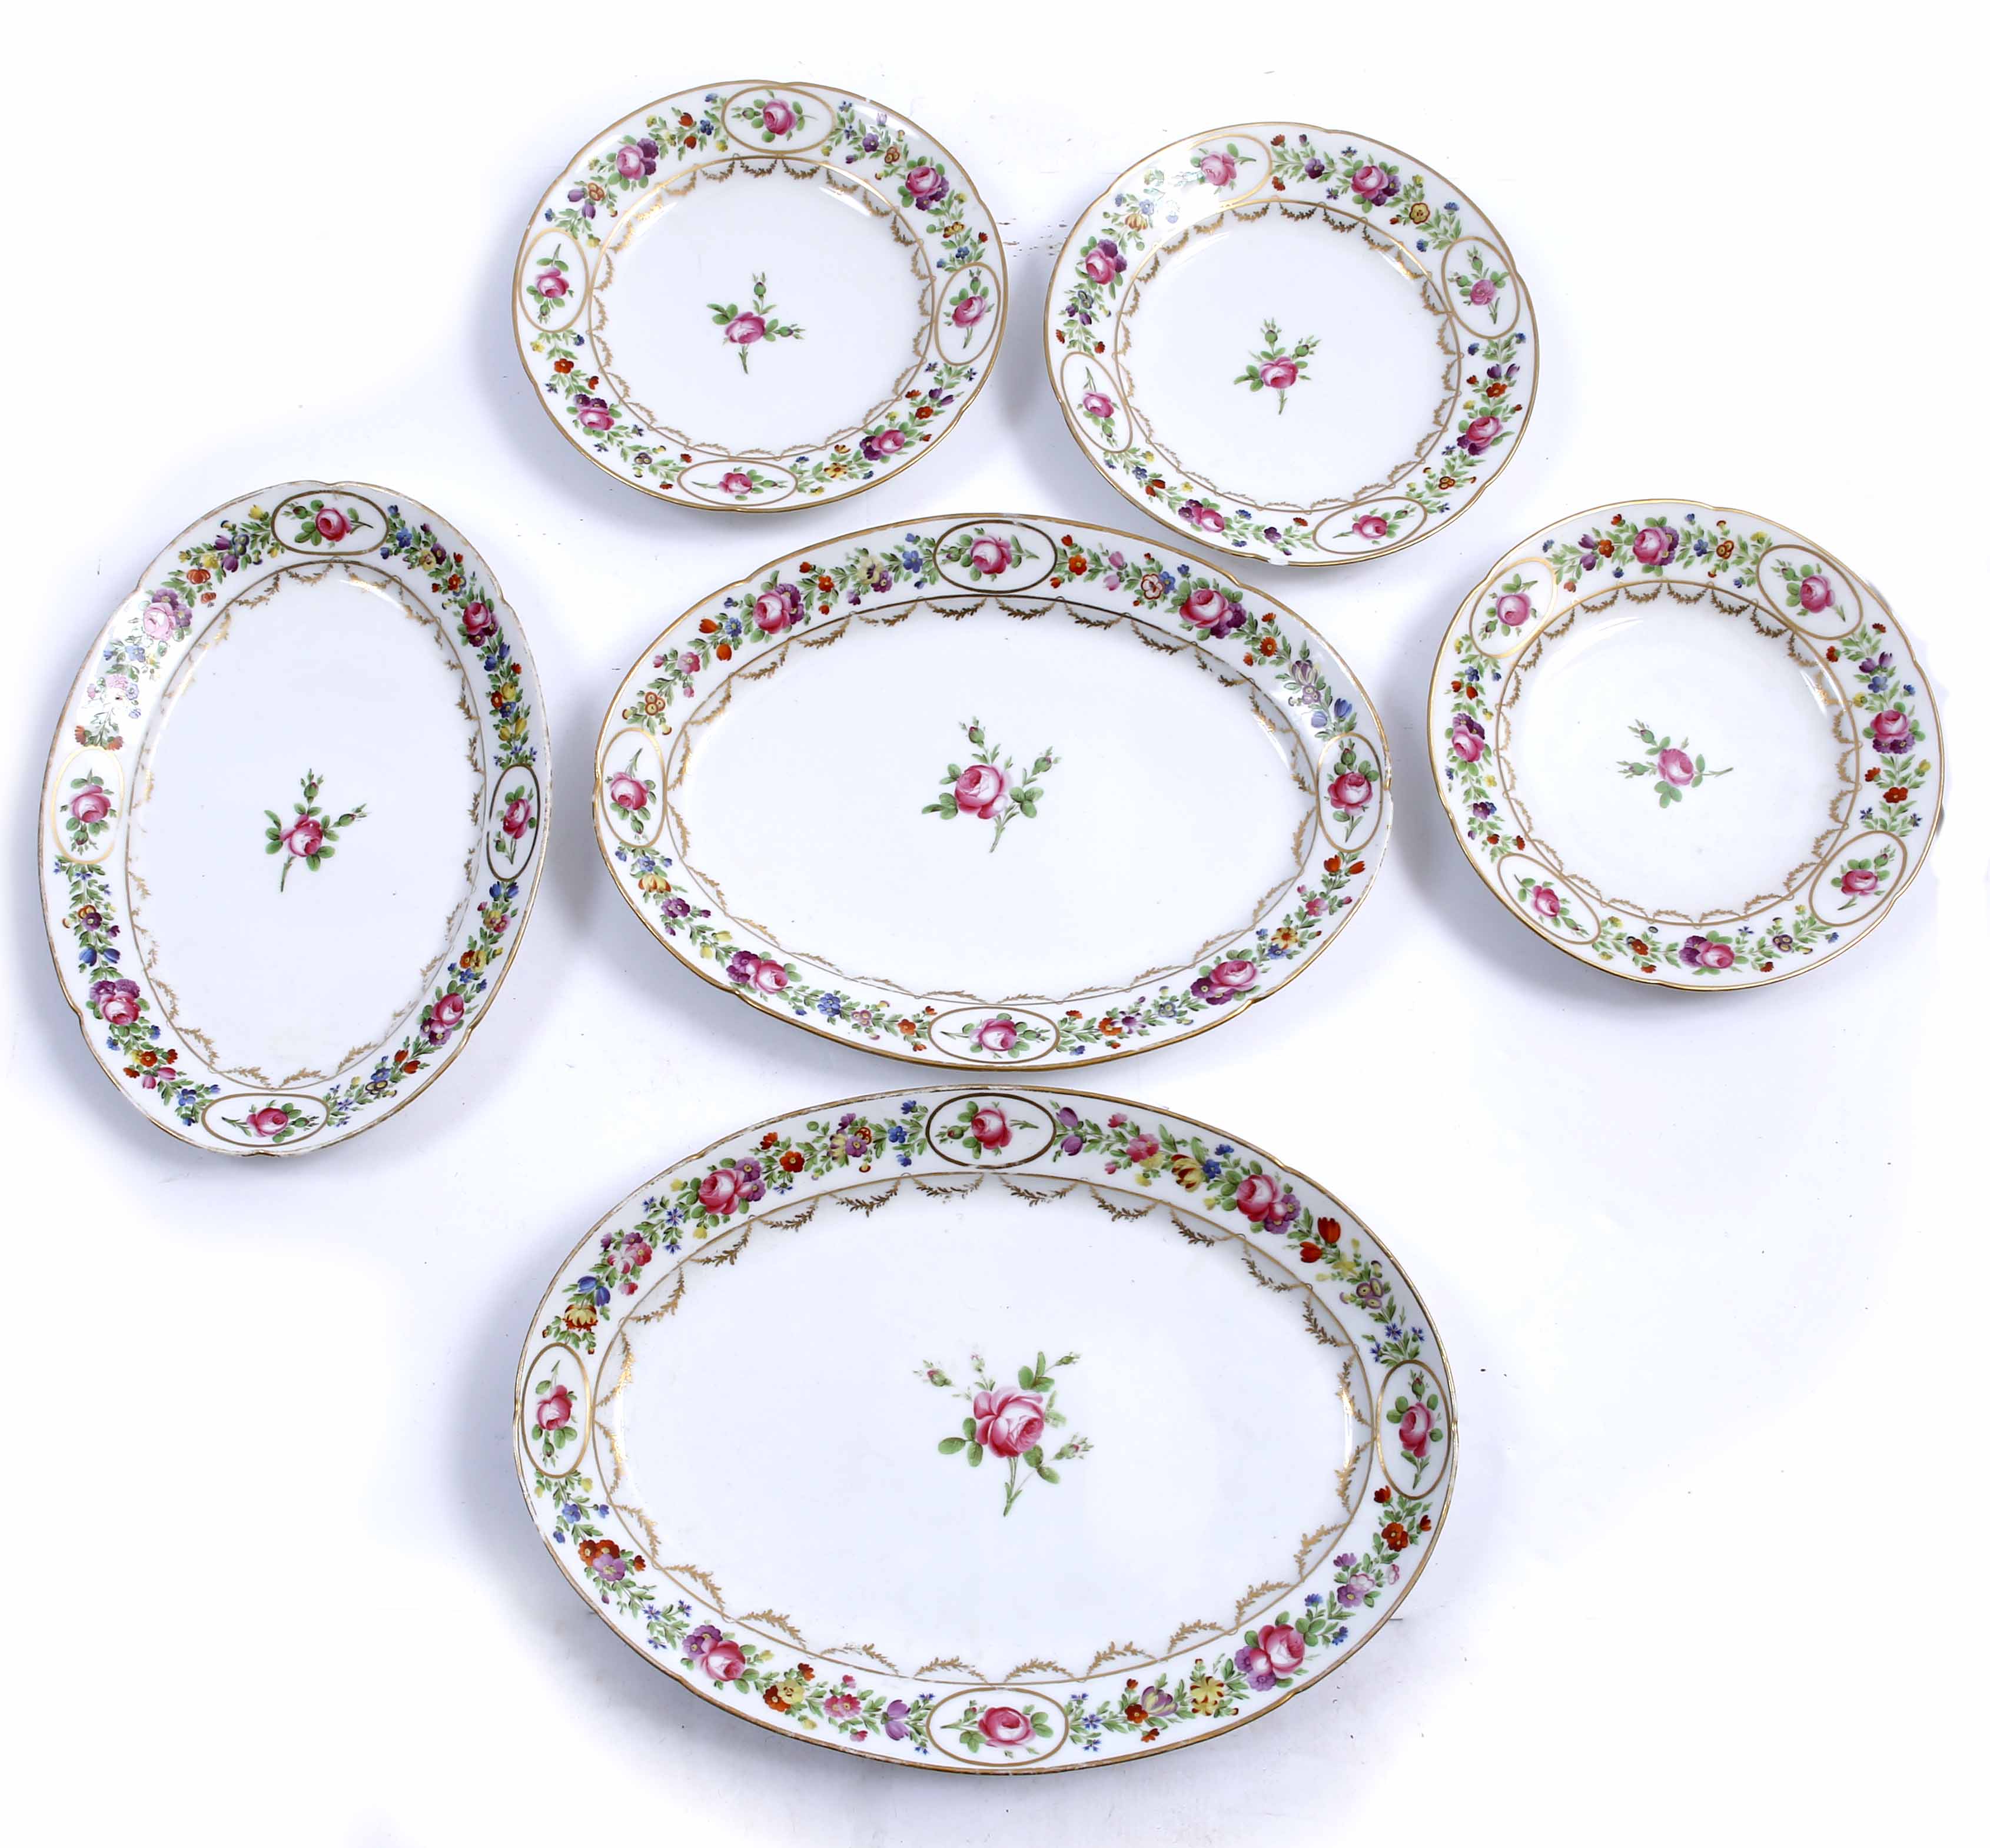 A GROUP OF SIX LATE 18TH / EARLY 19TH CENTURY FRENCH PORCELAIN PLATES and oval dishes from the